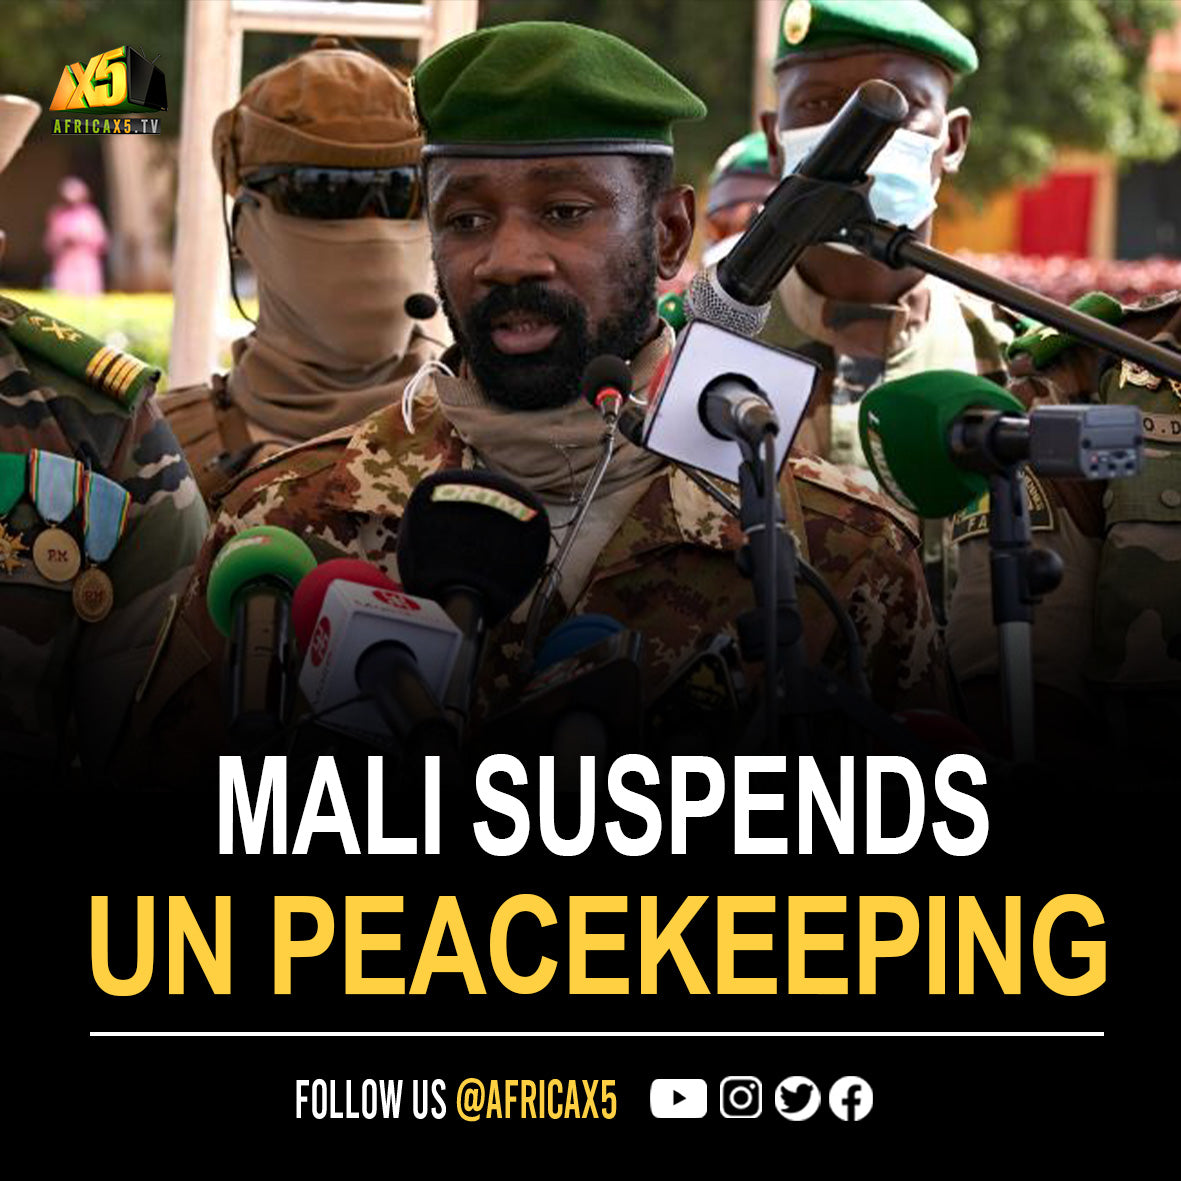 Mali suspends all new rotations of UN peacekeeping forces